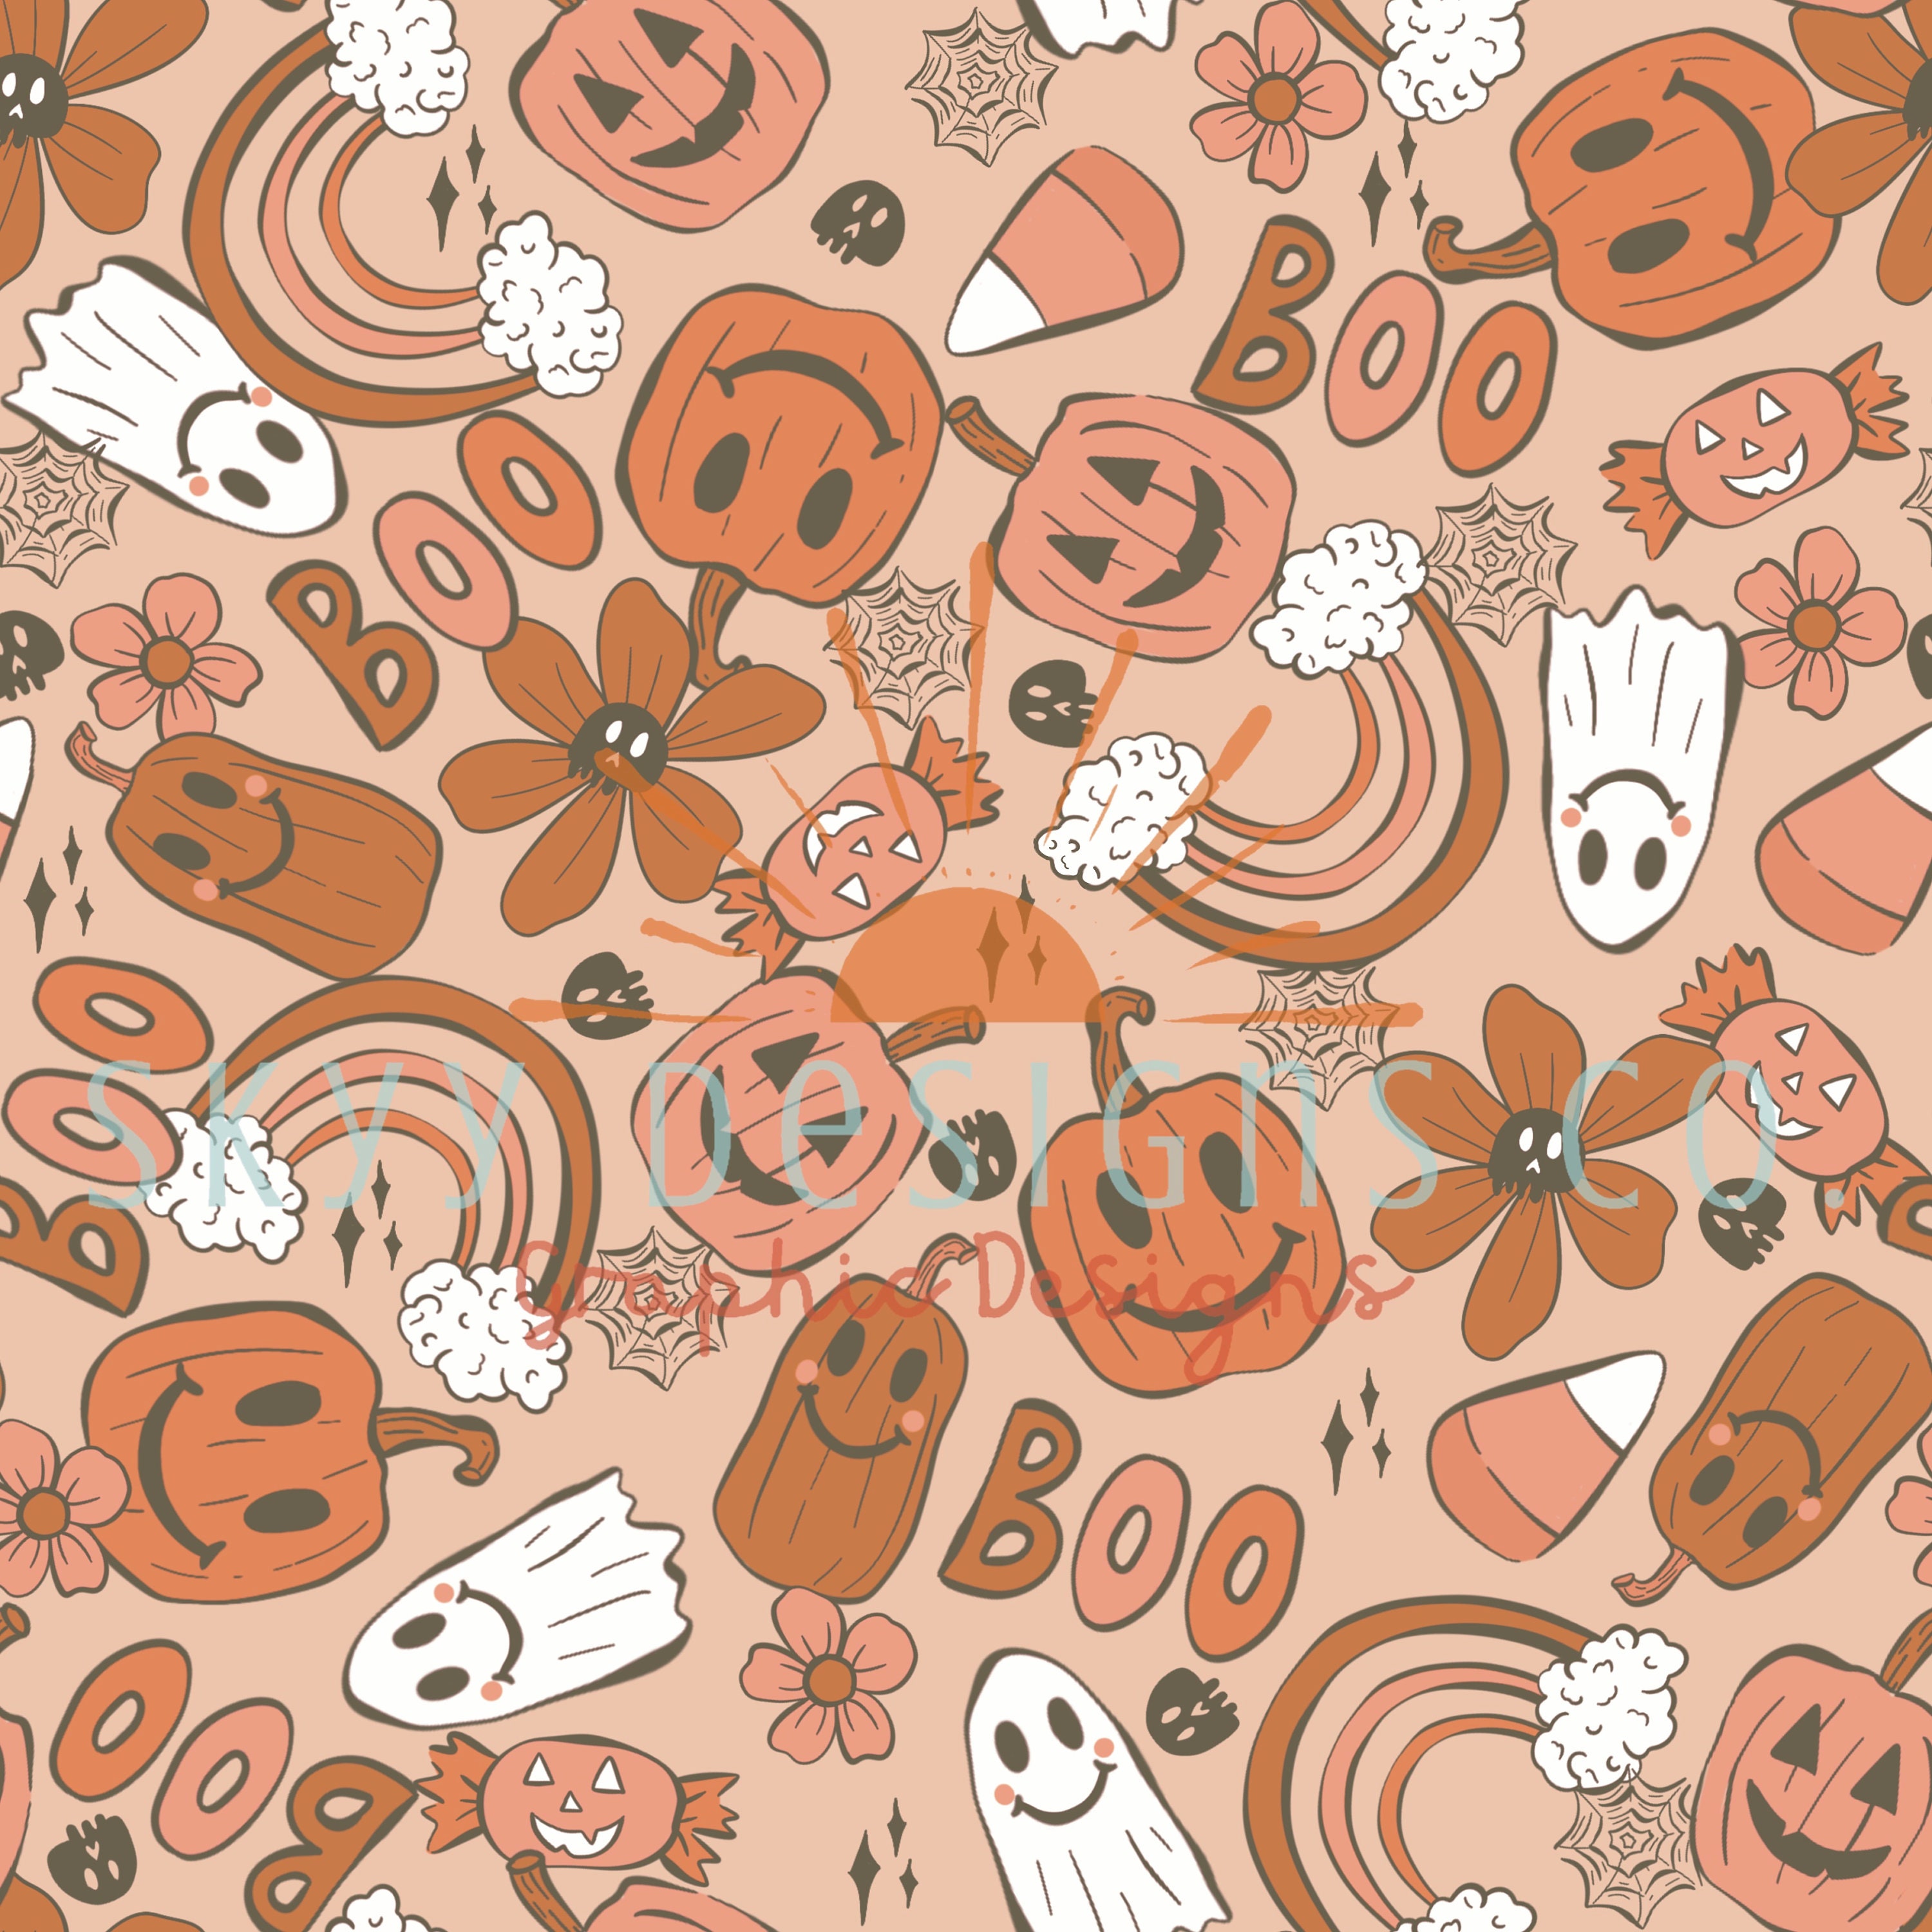 Boho Preppy Whimsical Fabric Wallpaper and Home Decor  Spoonflower